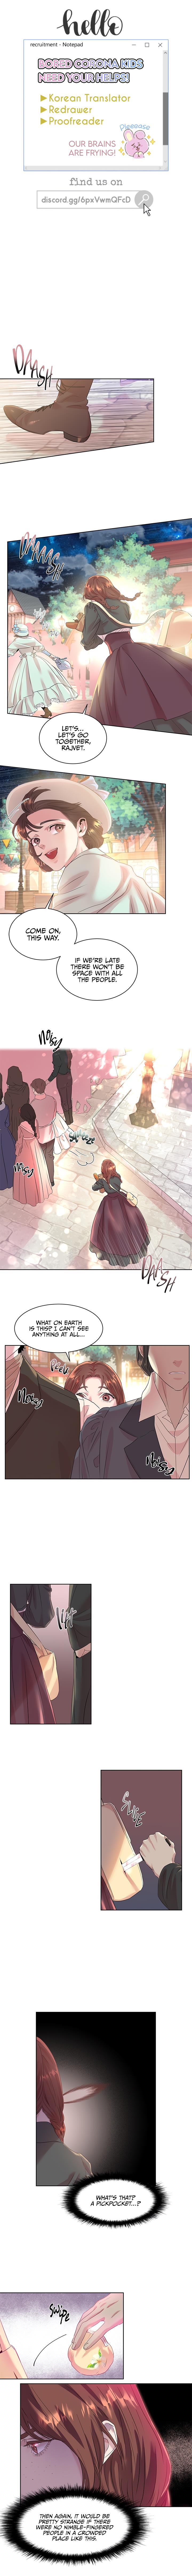 Aideen - Page 1